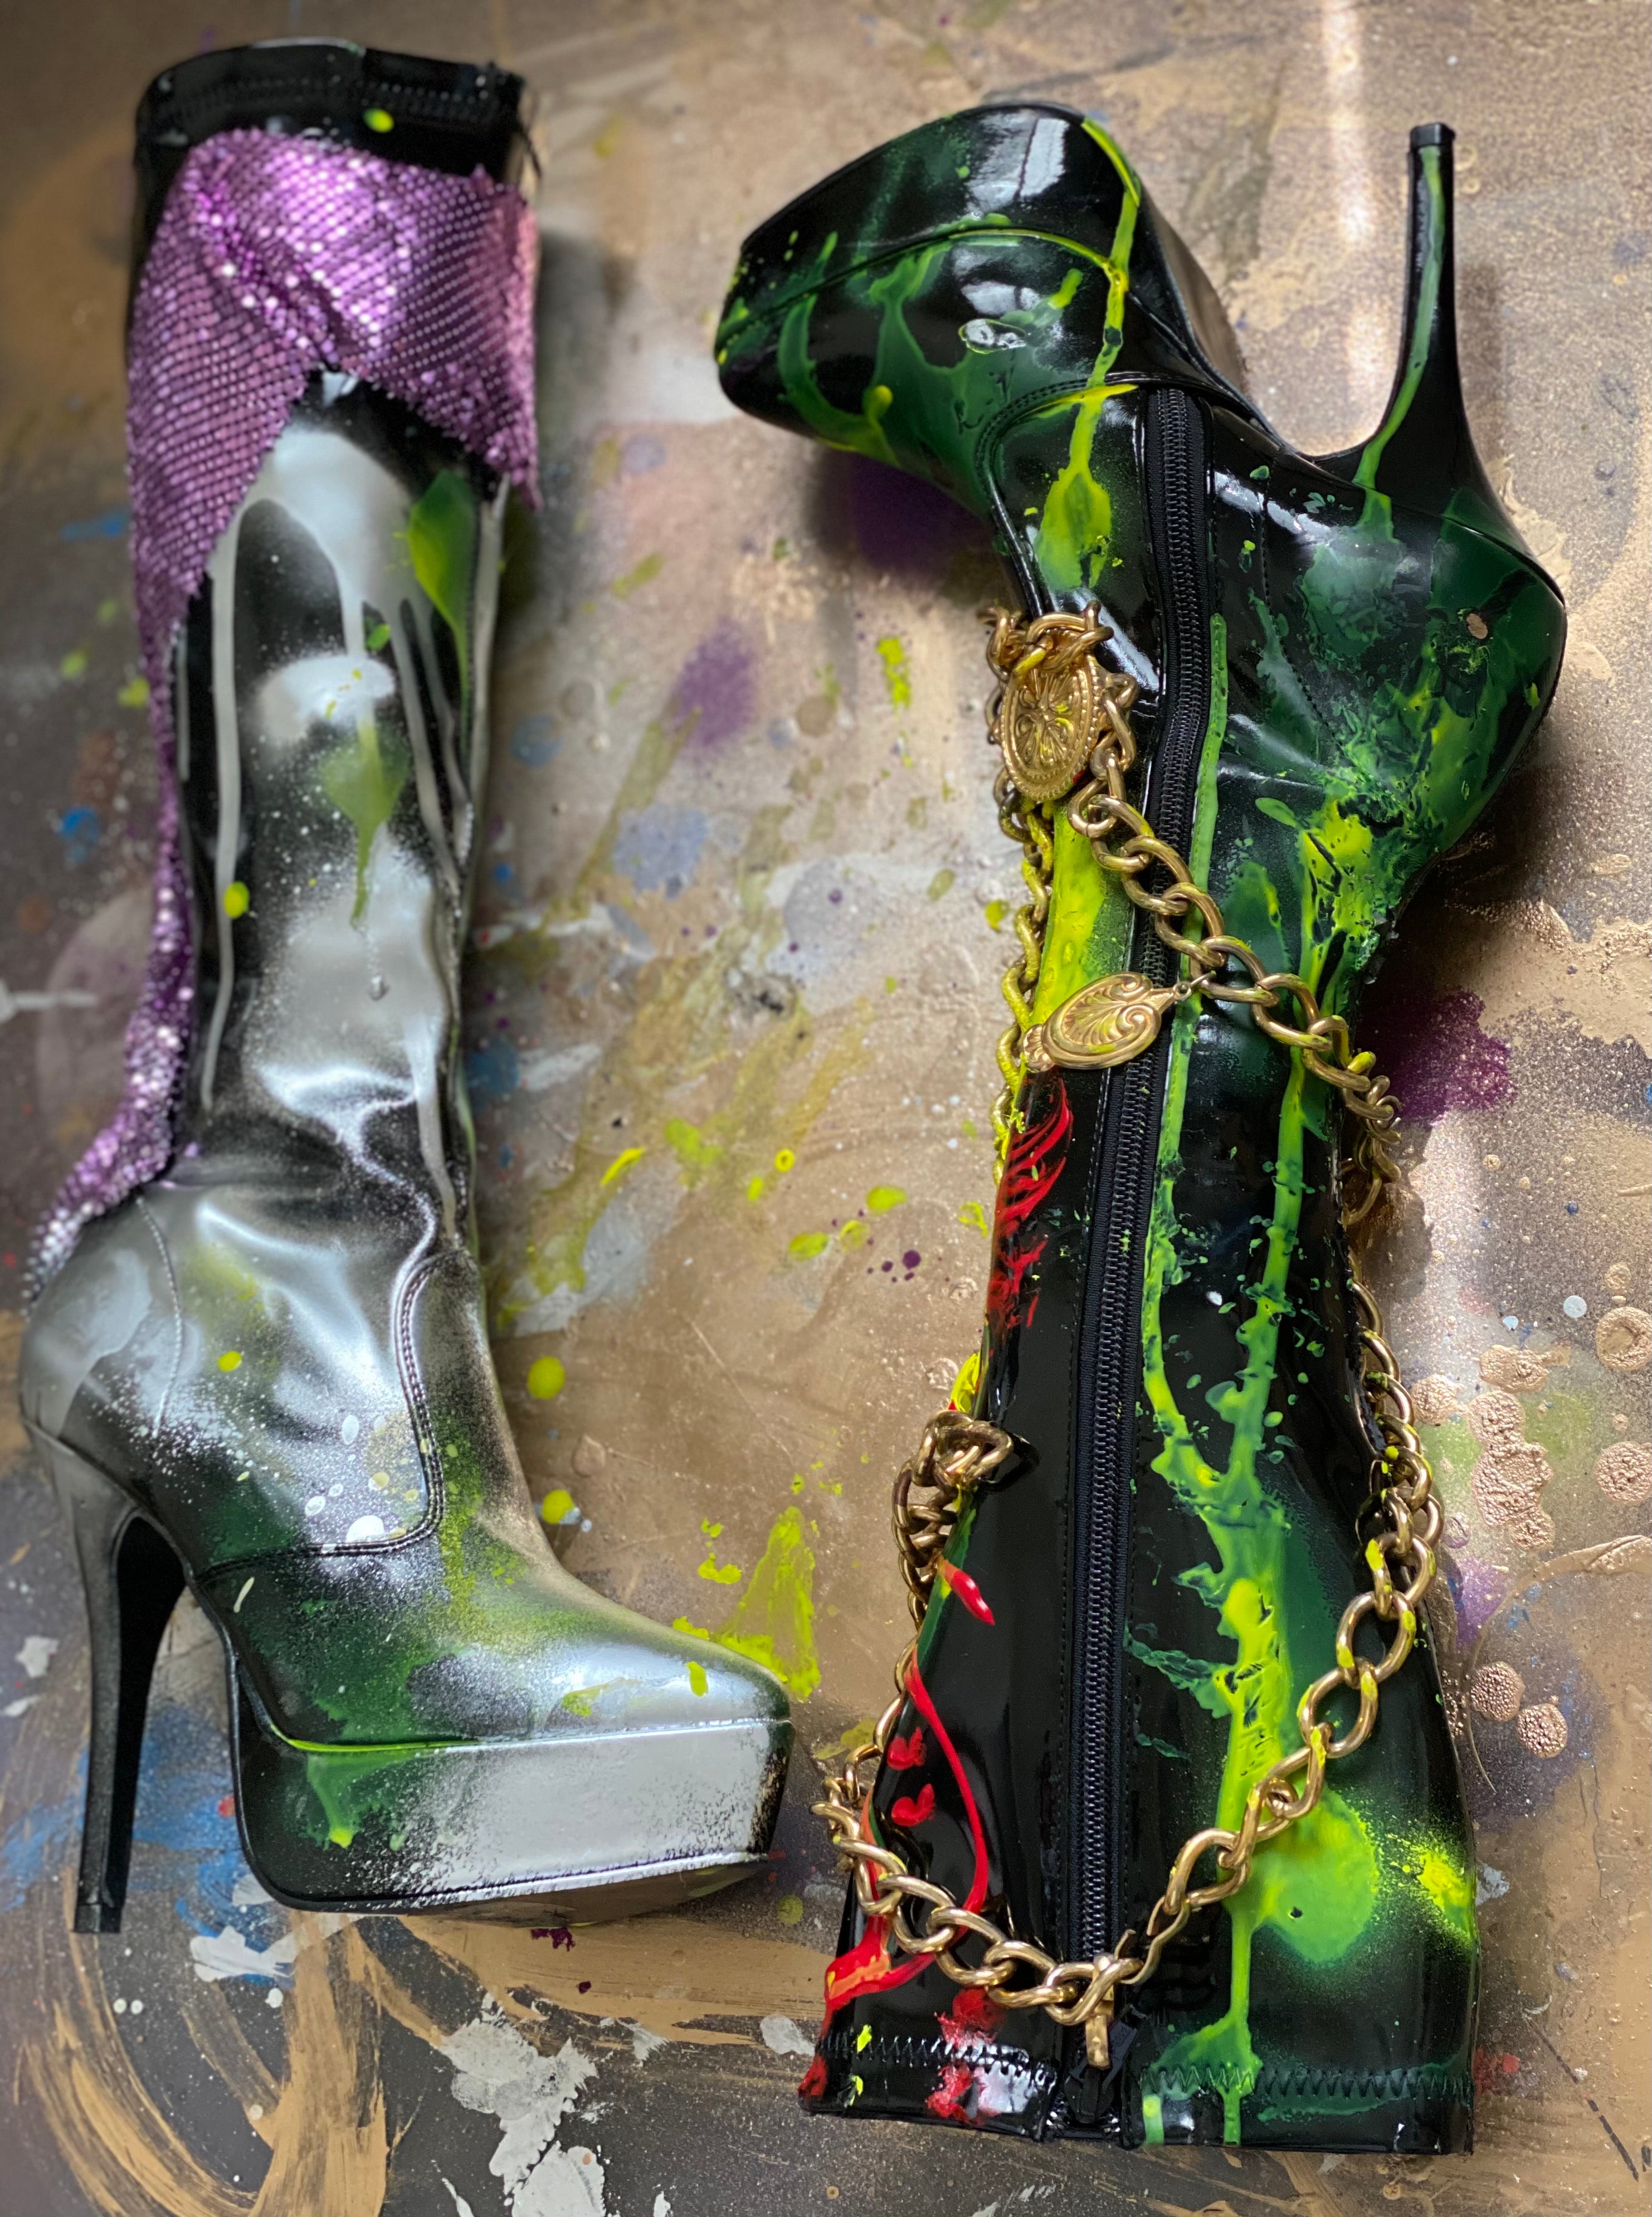 Platform Boot PsyBoot Chained Up Pretty Size 6 only!